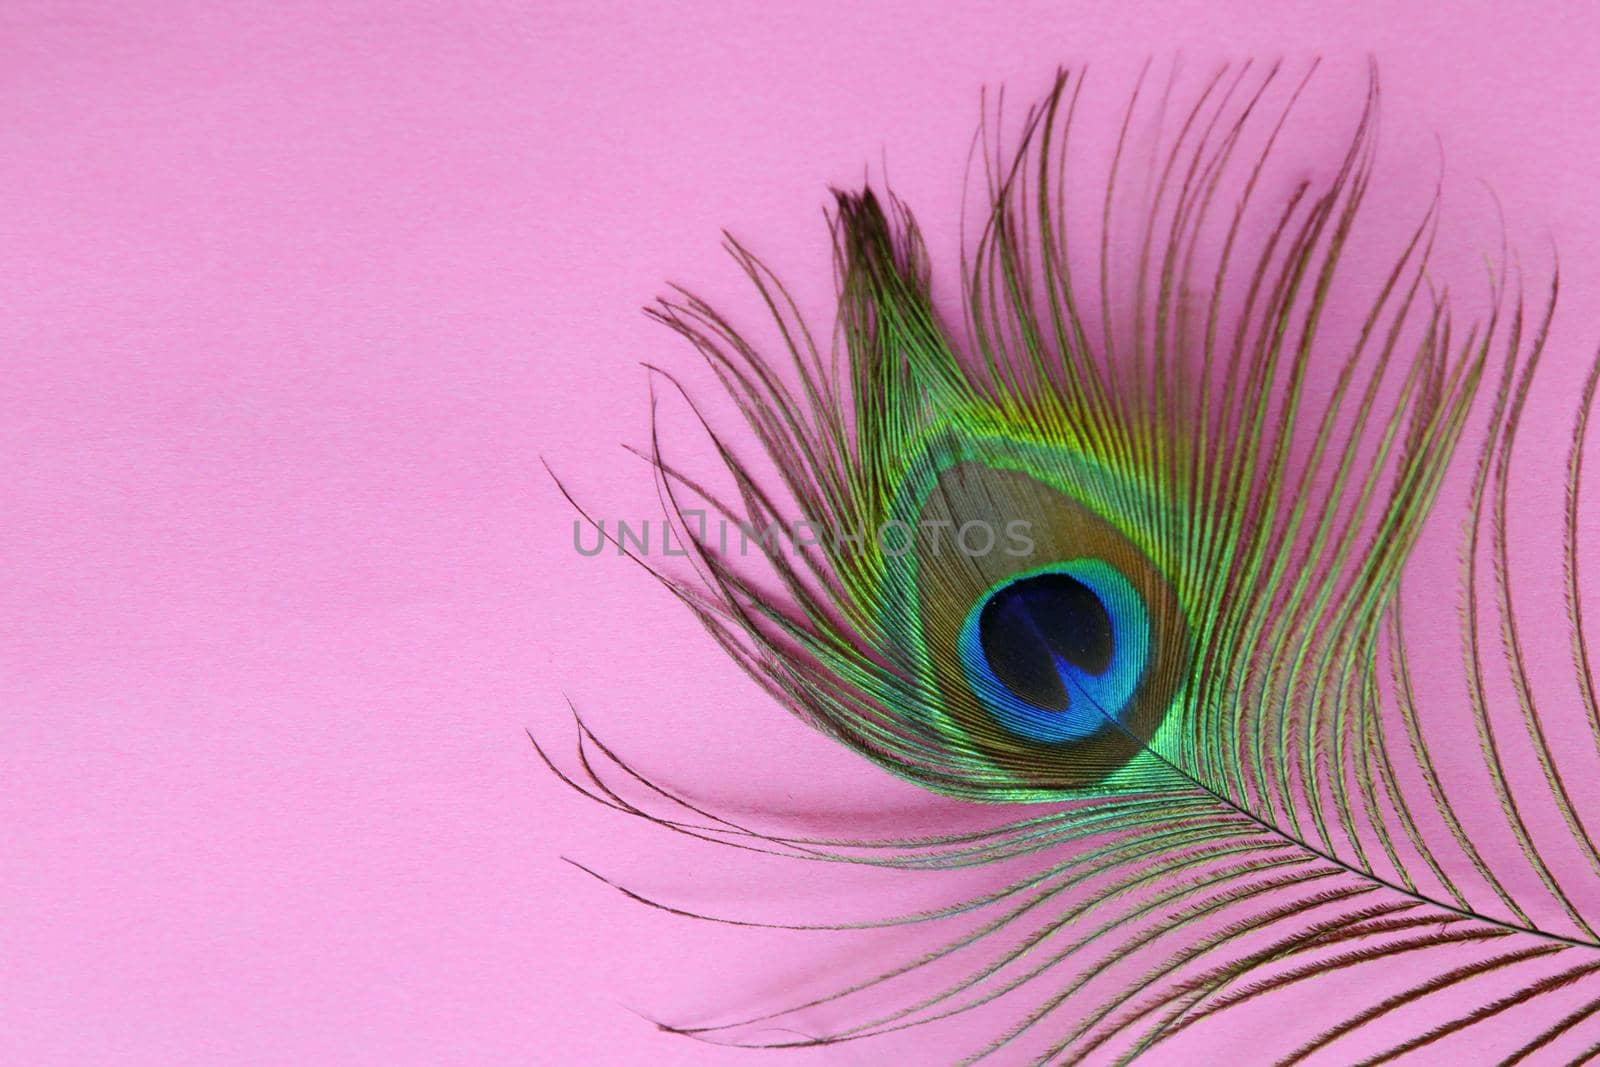 Detail of peacock feather eye on a pink background. Luxury Abstract Texture for Peafowl wallpaper, pink blue-green color. Indian peafowl extravagant plumage - eye-spotted tail of covert feathers.